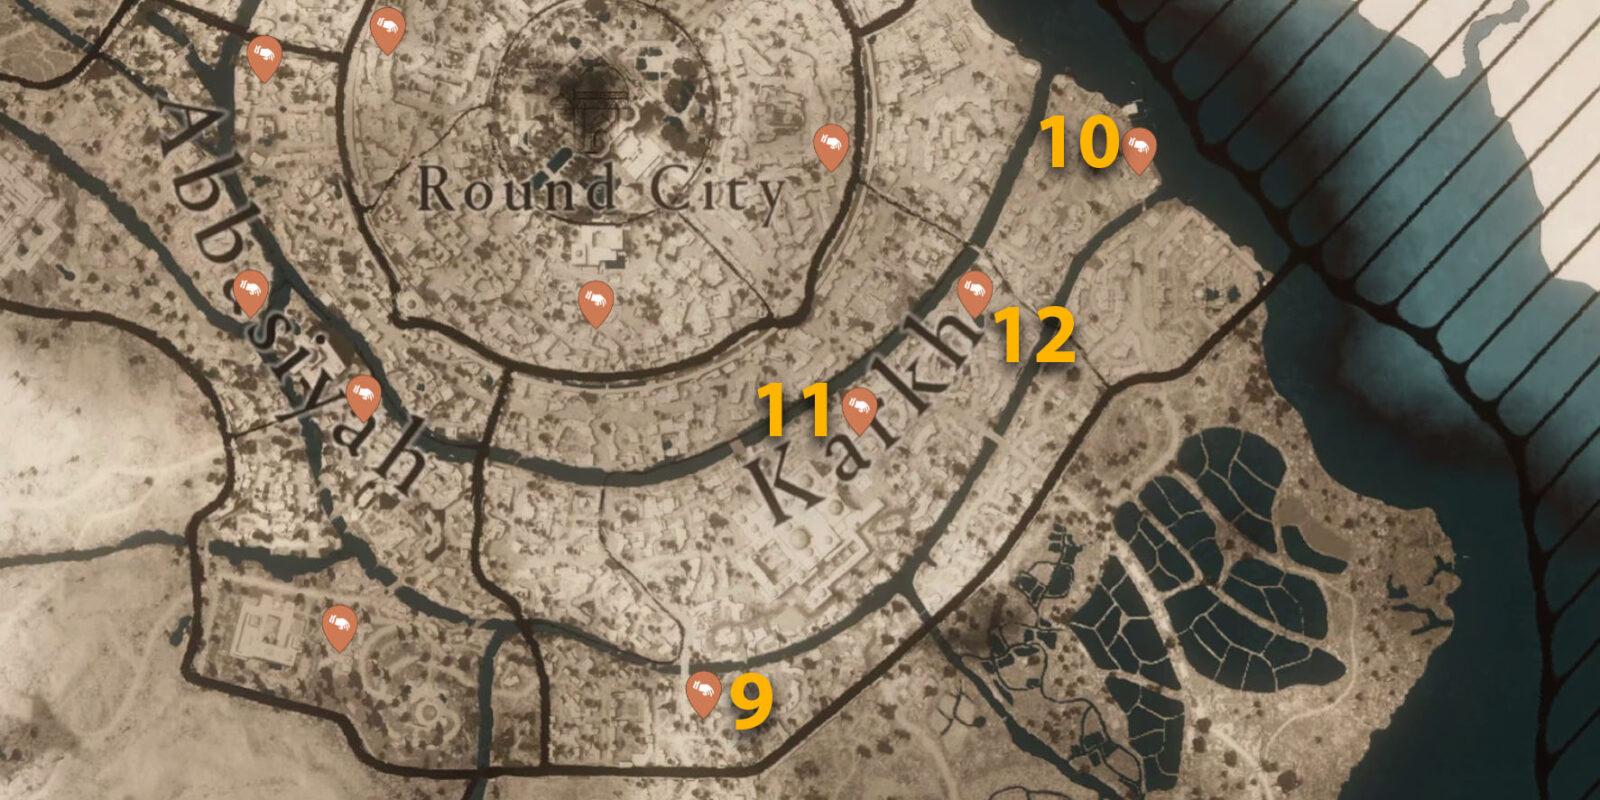 Karkh Dervis' Artifacts locations